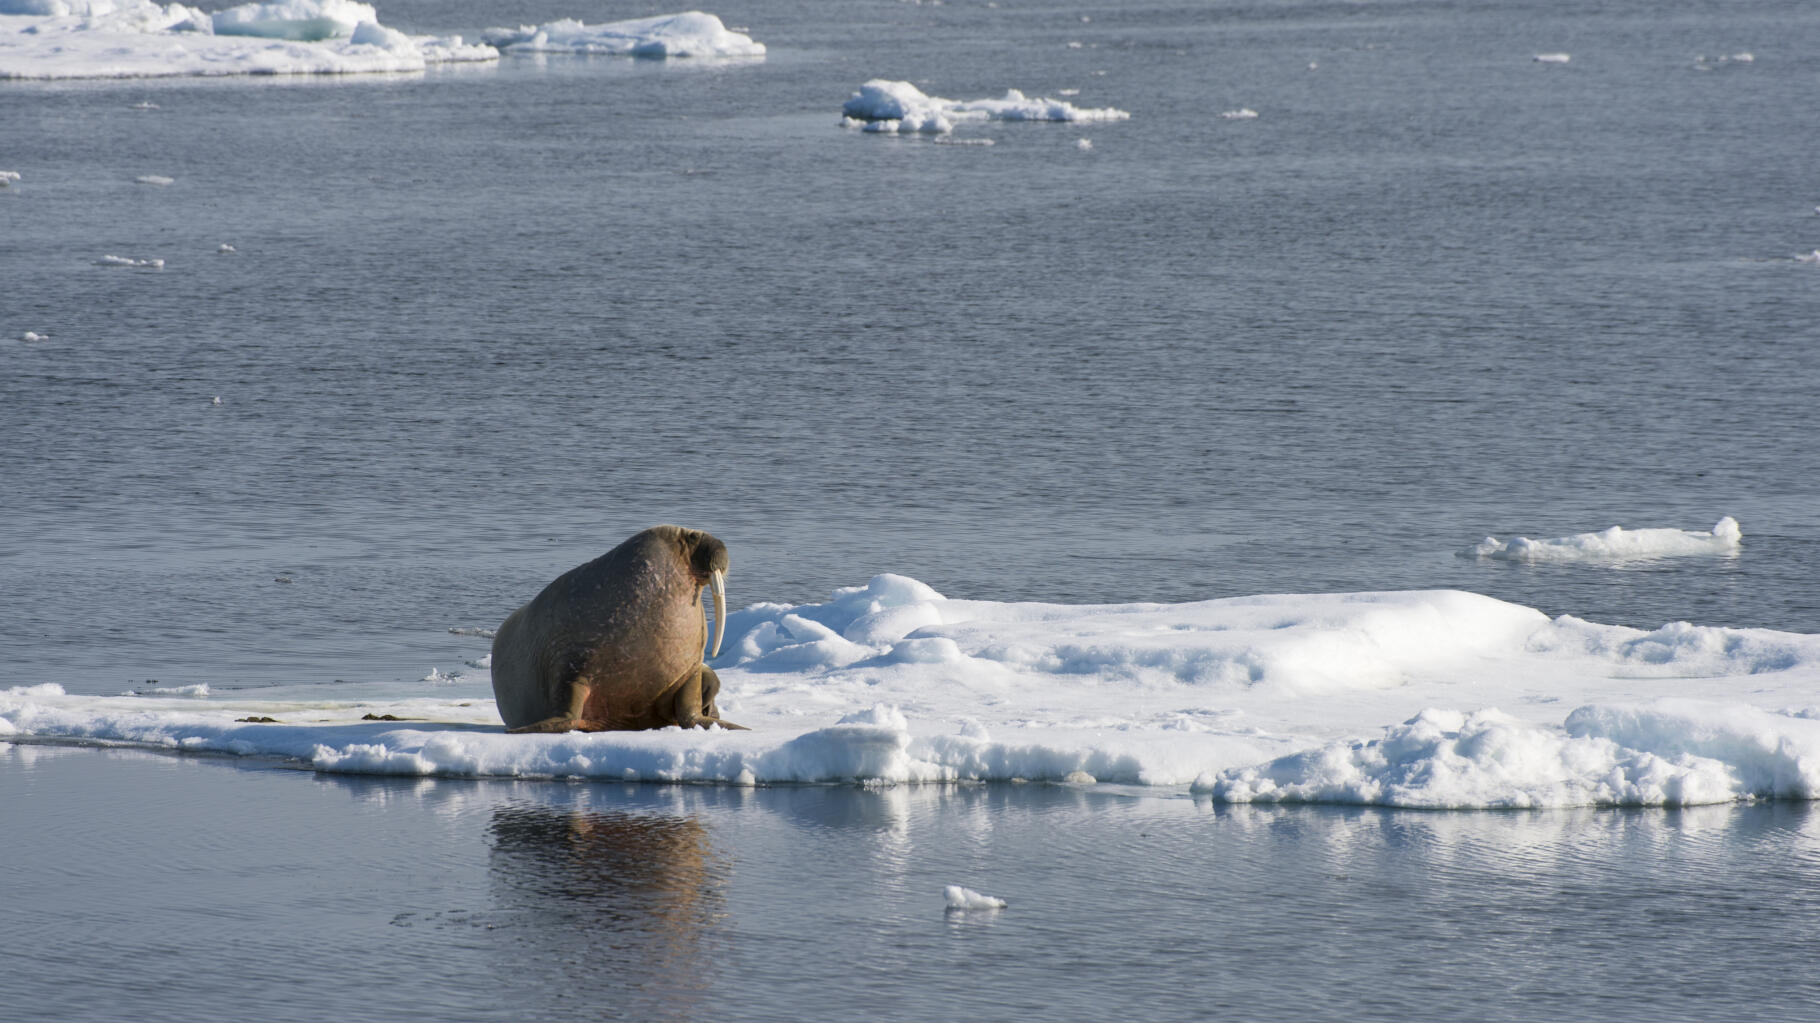 walrus killed by disease in the Arctic, a first for this mammal